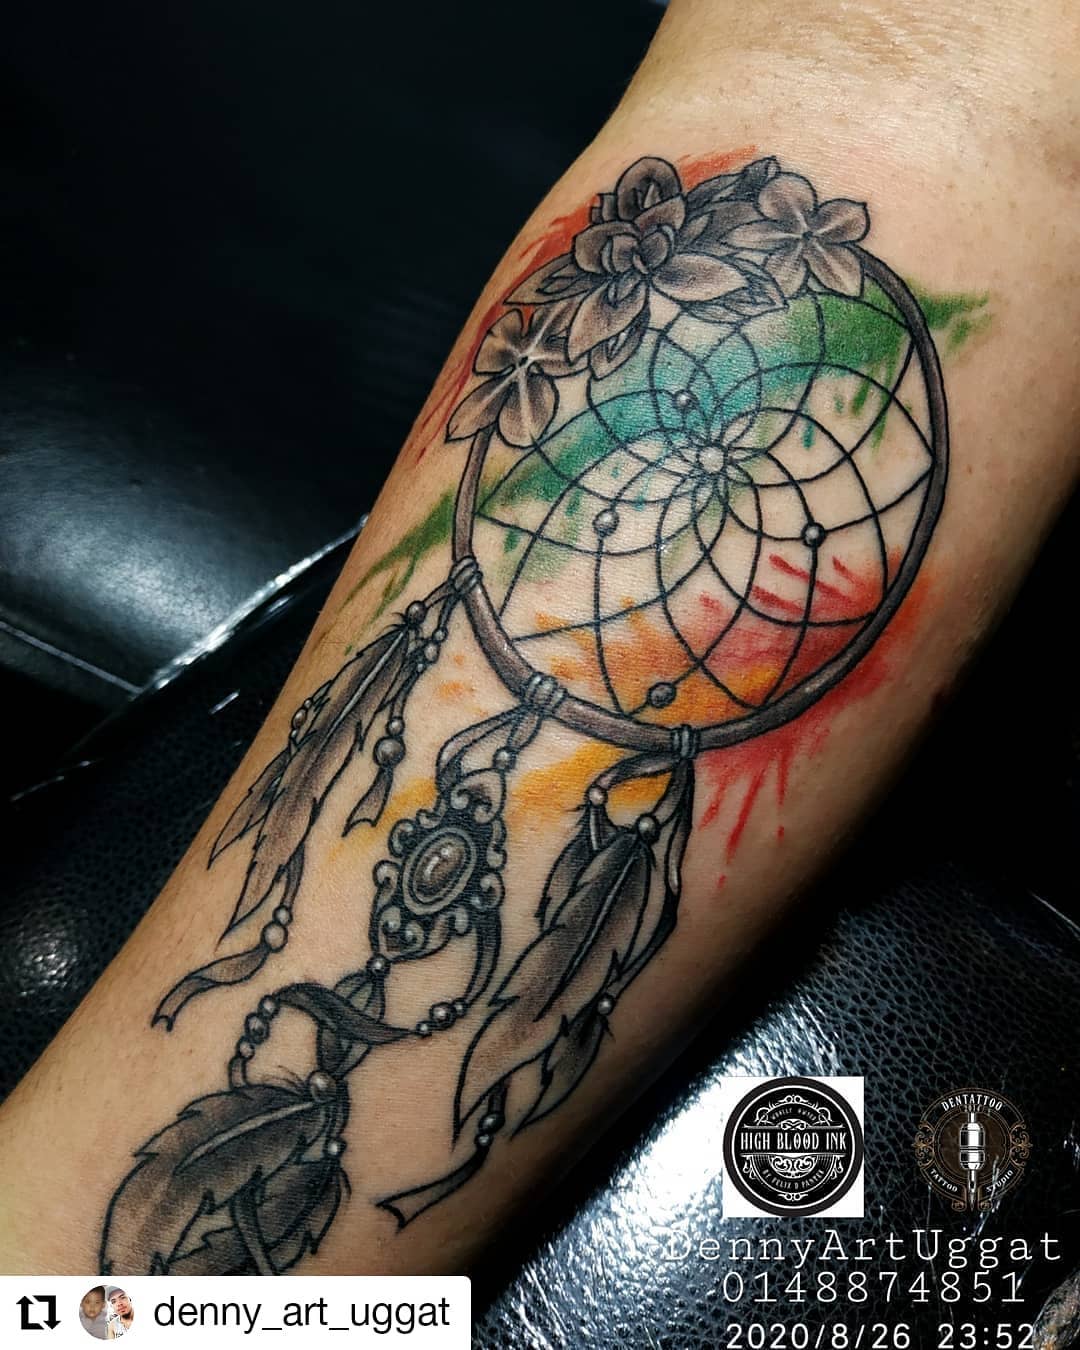 Why not adding some color and energy to your black dream catcher tattoo? A watercolor splash will work if you want to do this. The watercolor splash represents the colorful nature of dreams—and how they can be both good and bad.